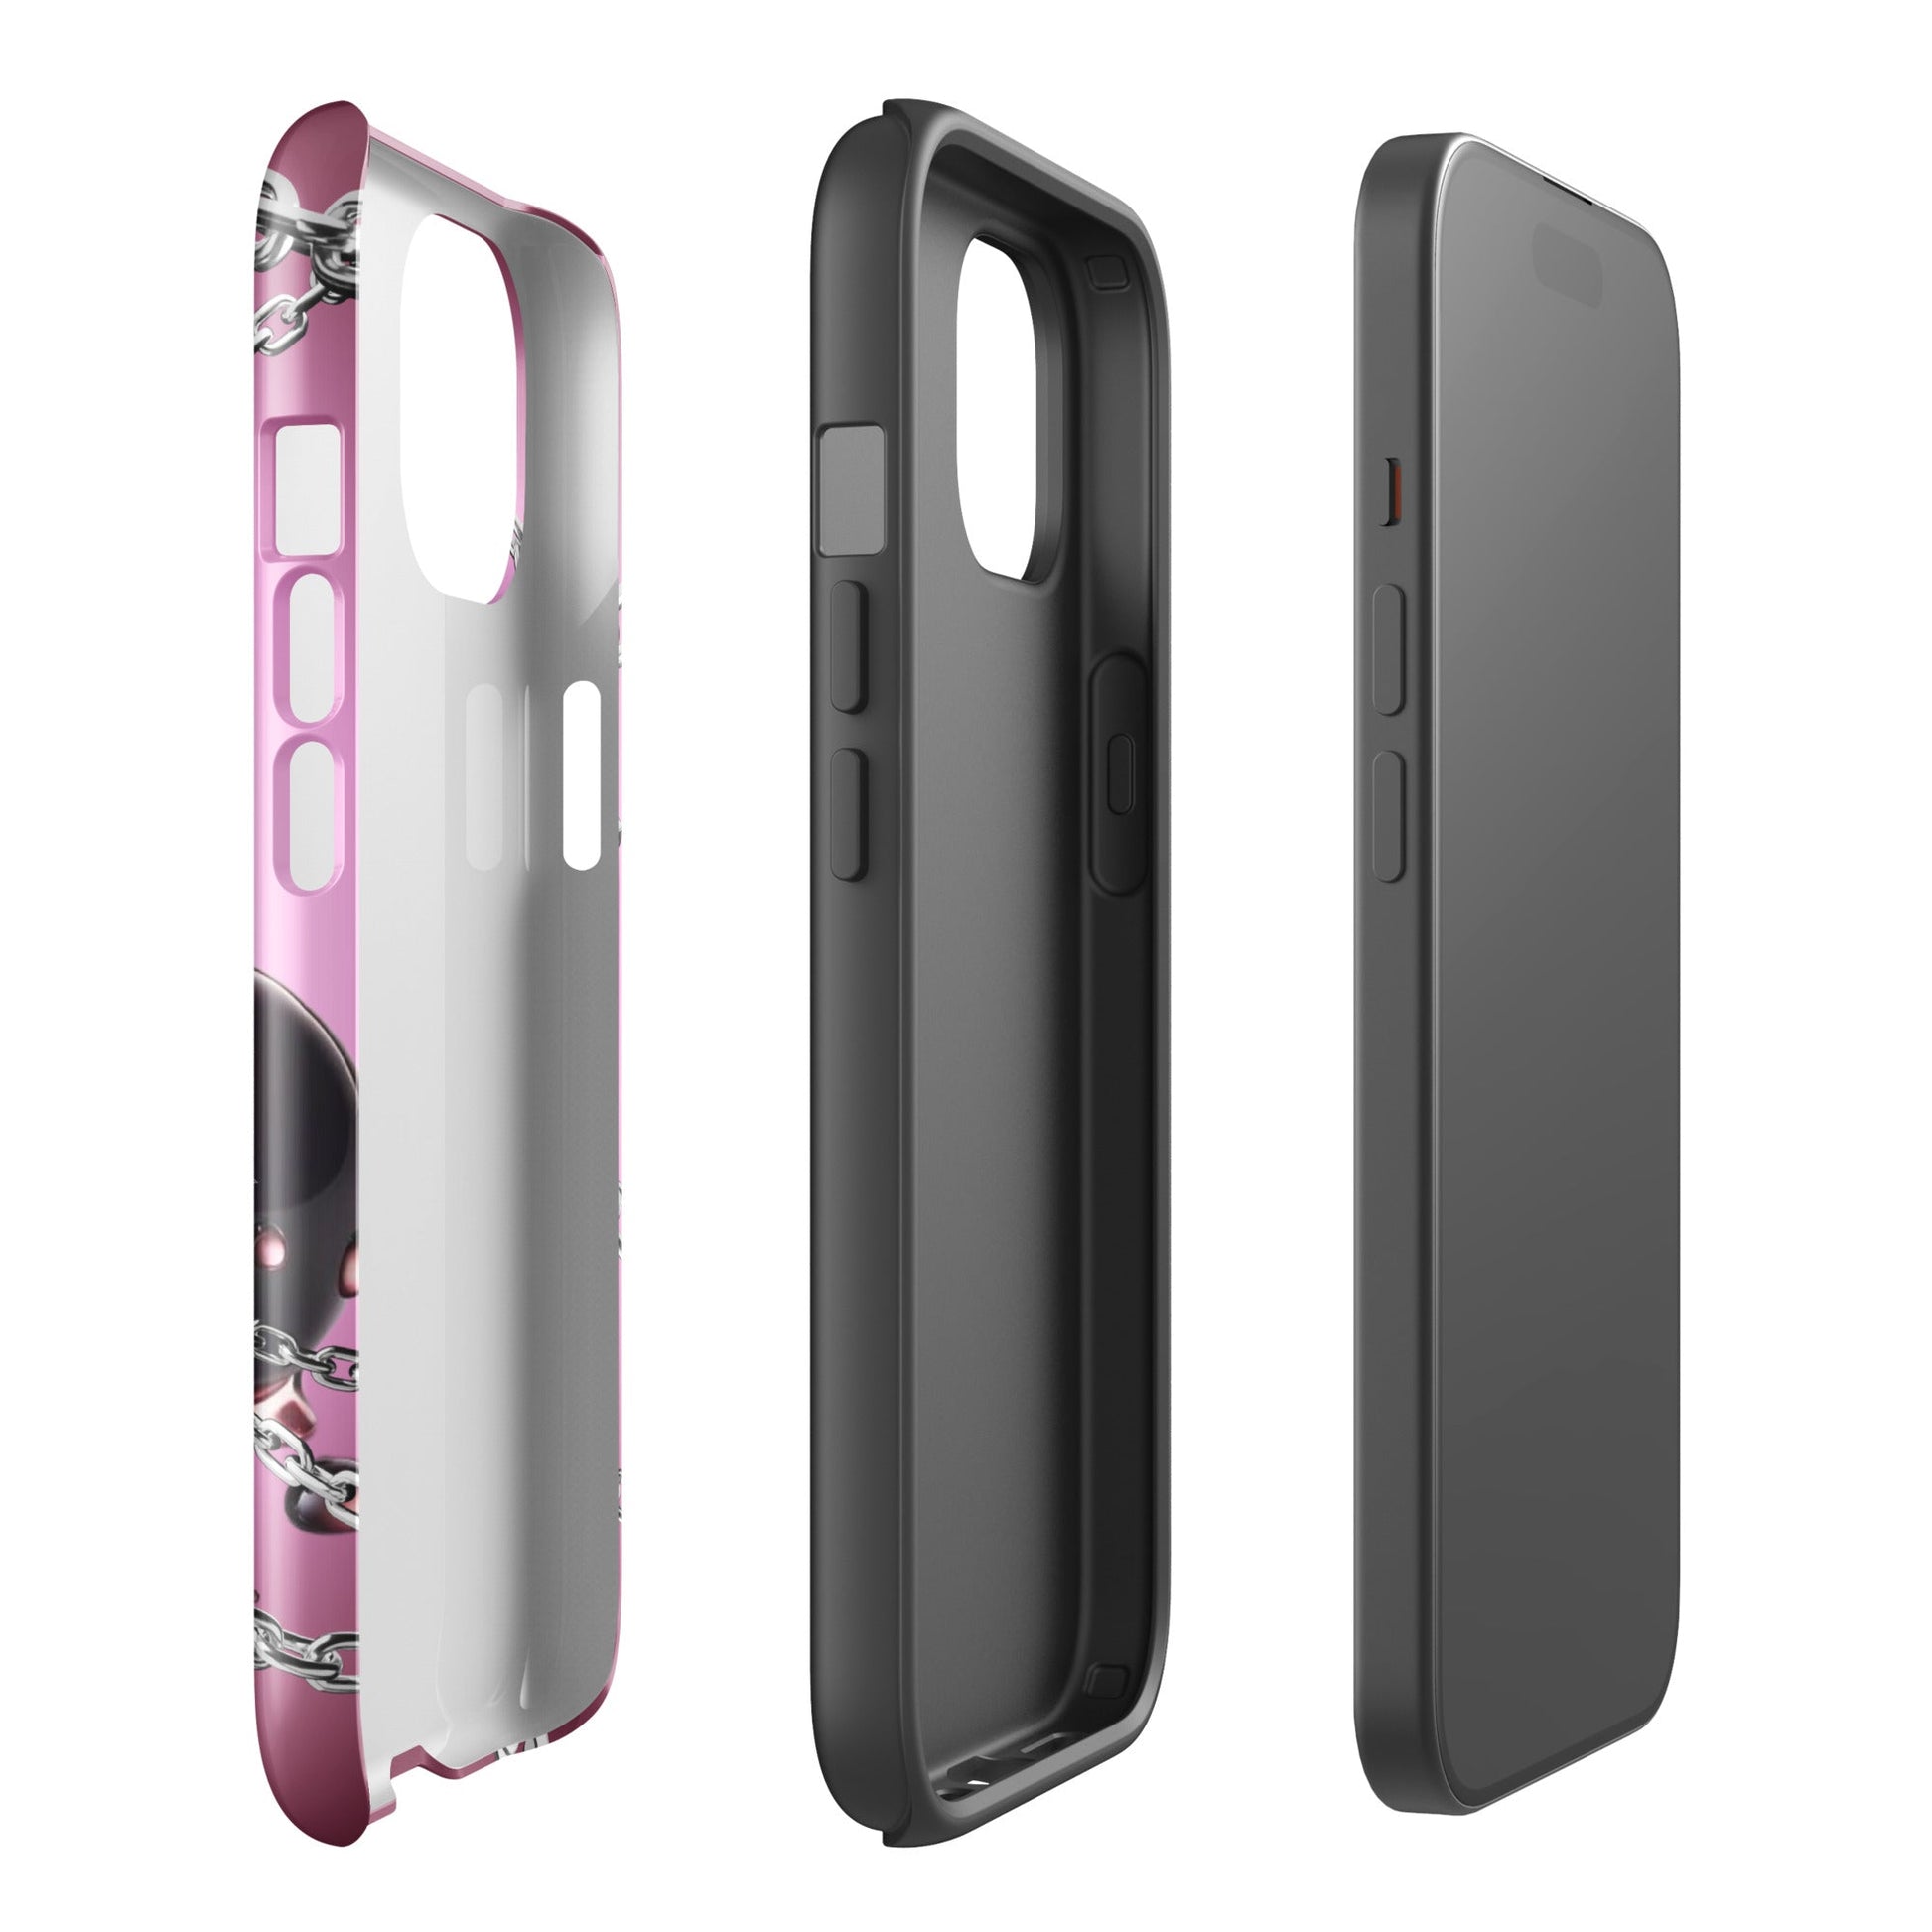 Bliss iPhone Case - blunt cases